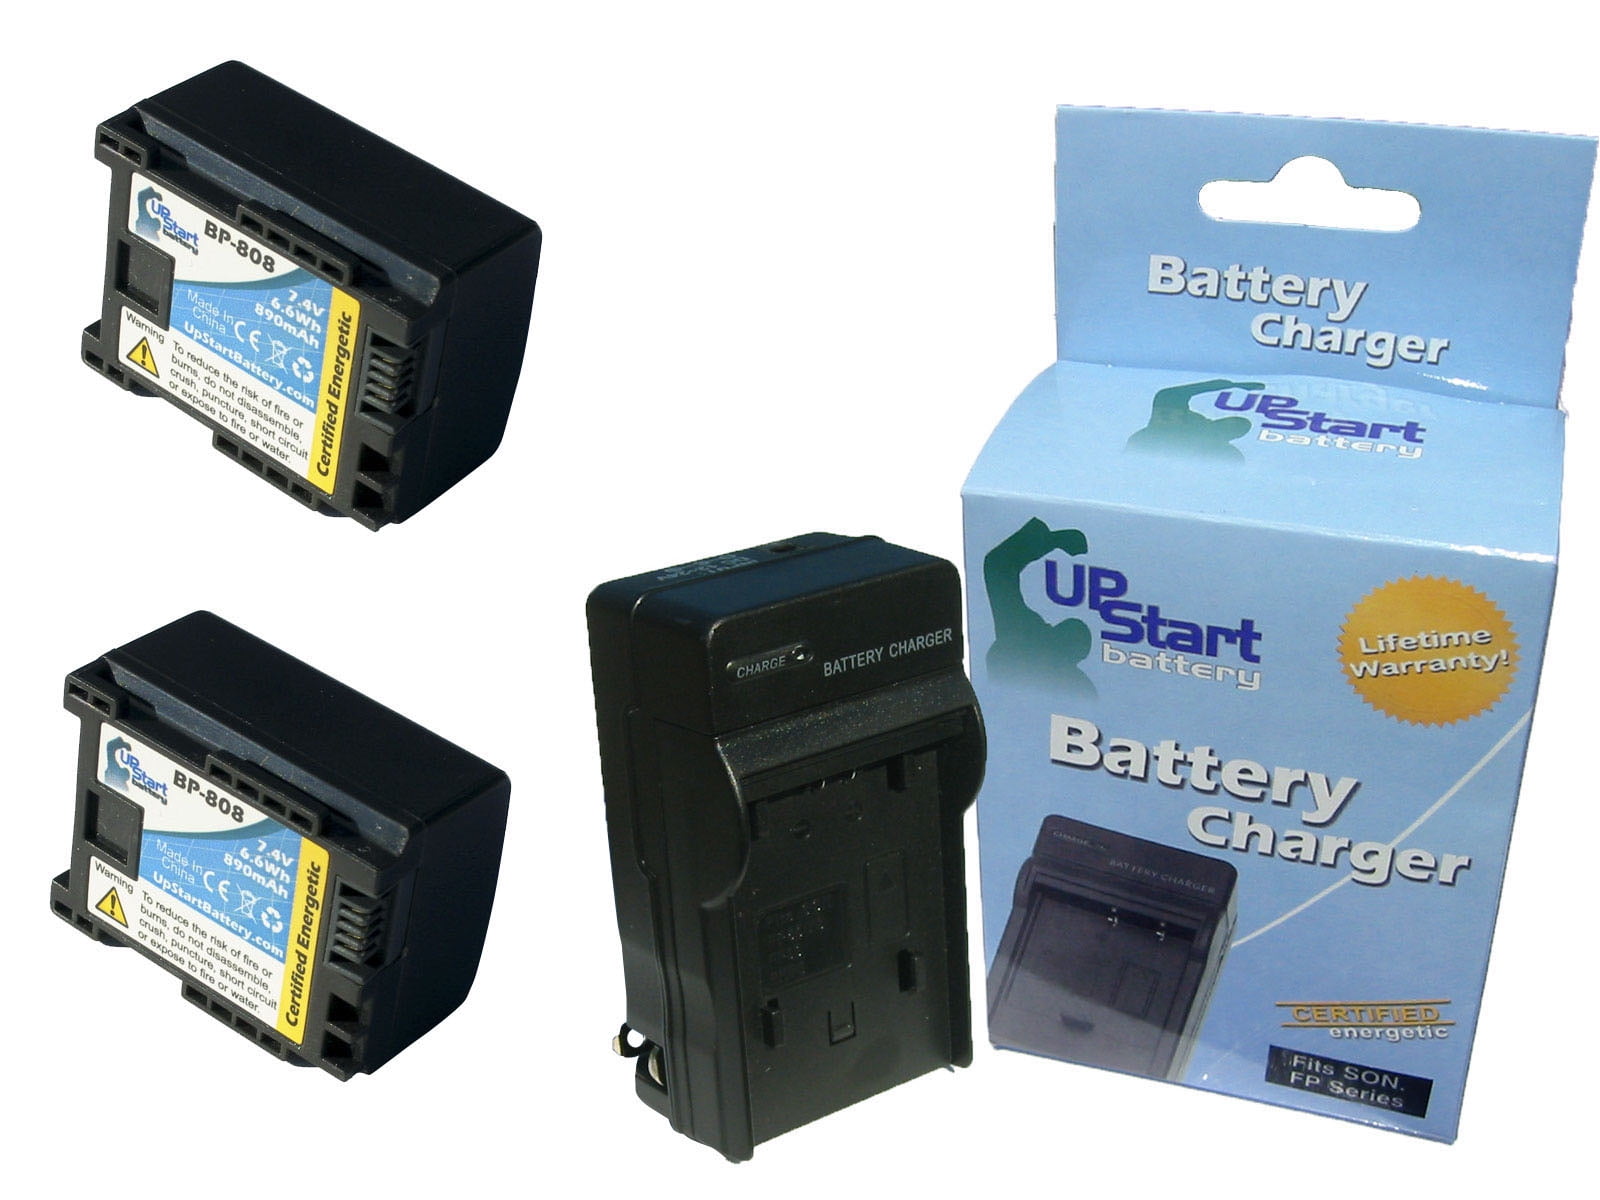 HF G20 FS20 XA10 HD FS21 VIXIA HF M30 FS11 FS200 XA10 FS31 FS300 FS400 HF G10 FS40 FS22 FS100 Kastar 4-Pack BP-808 Battery and LTD2 USB Charger Replacement for Canon VIXIA HG30 FS10